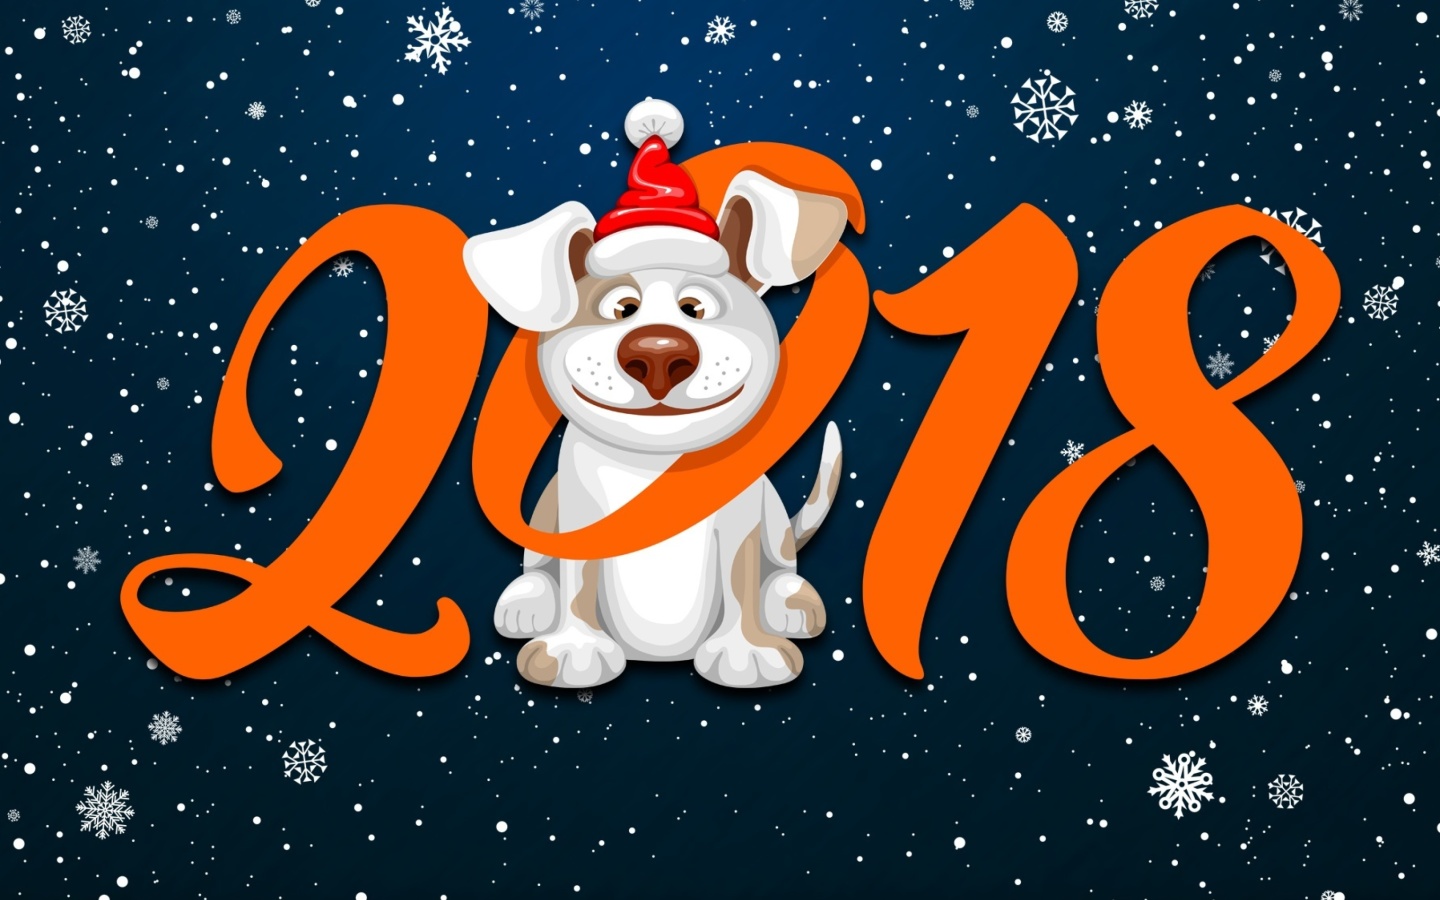 New Year Dog 2018 with Snow wallpaper 1440x900